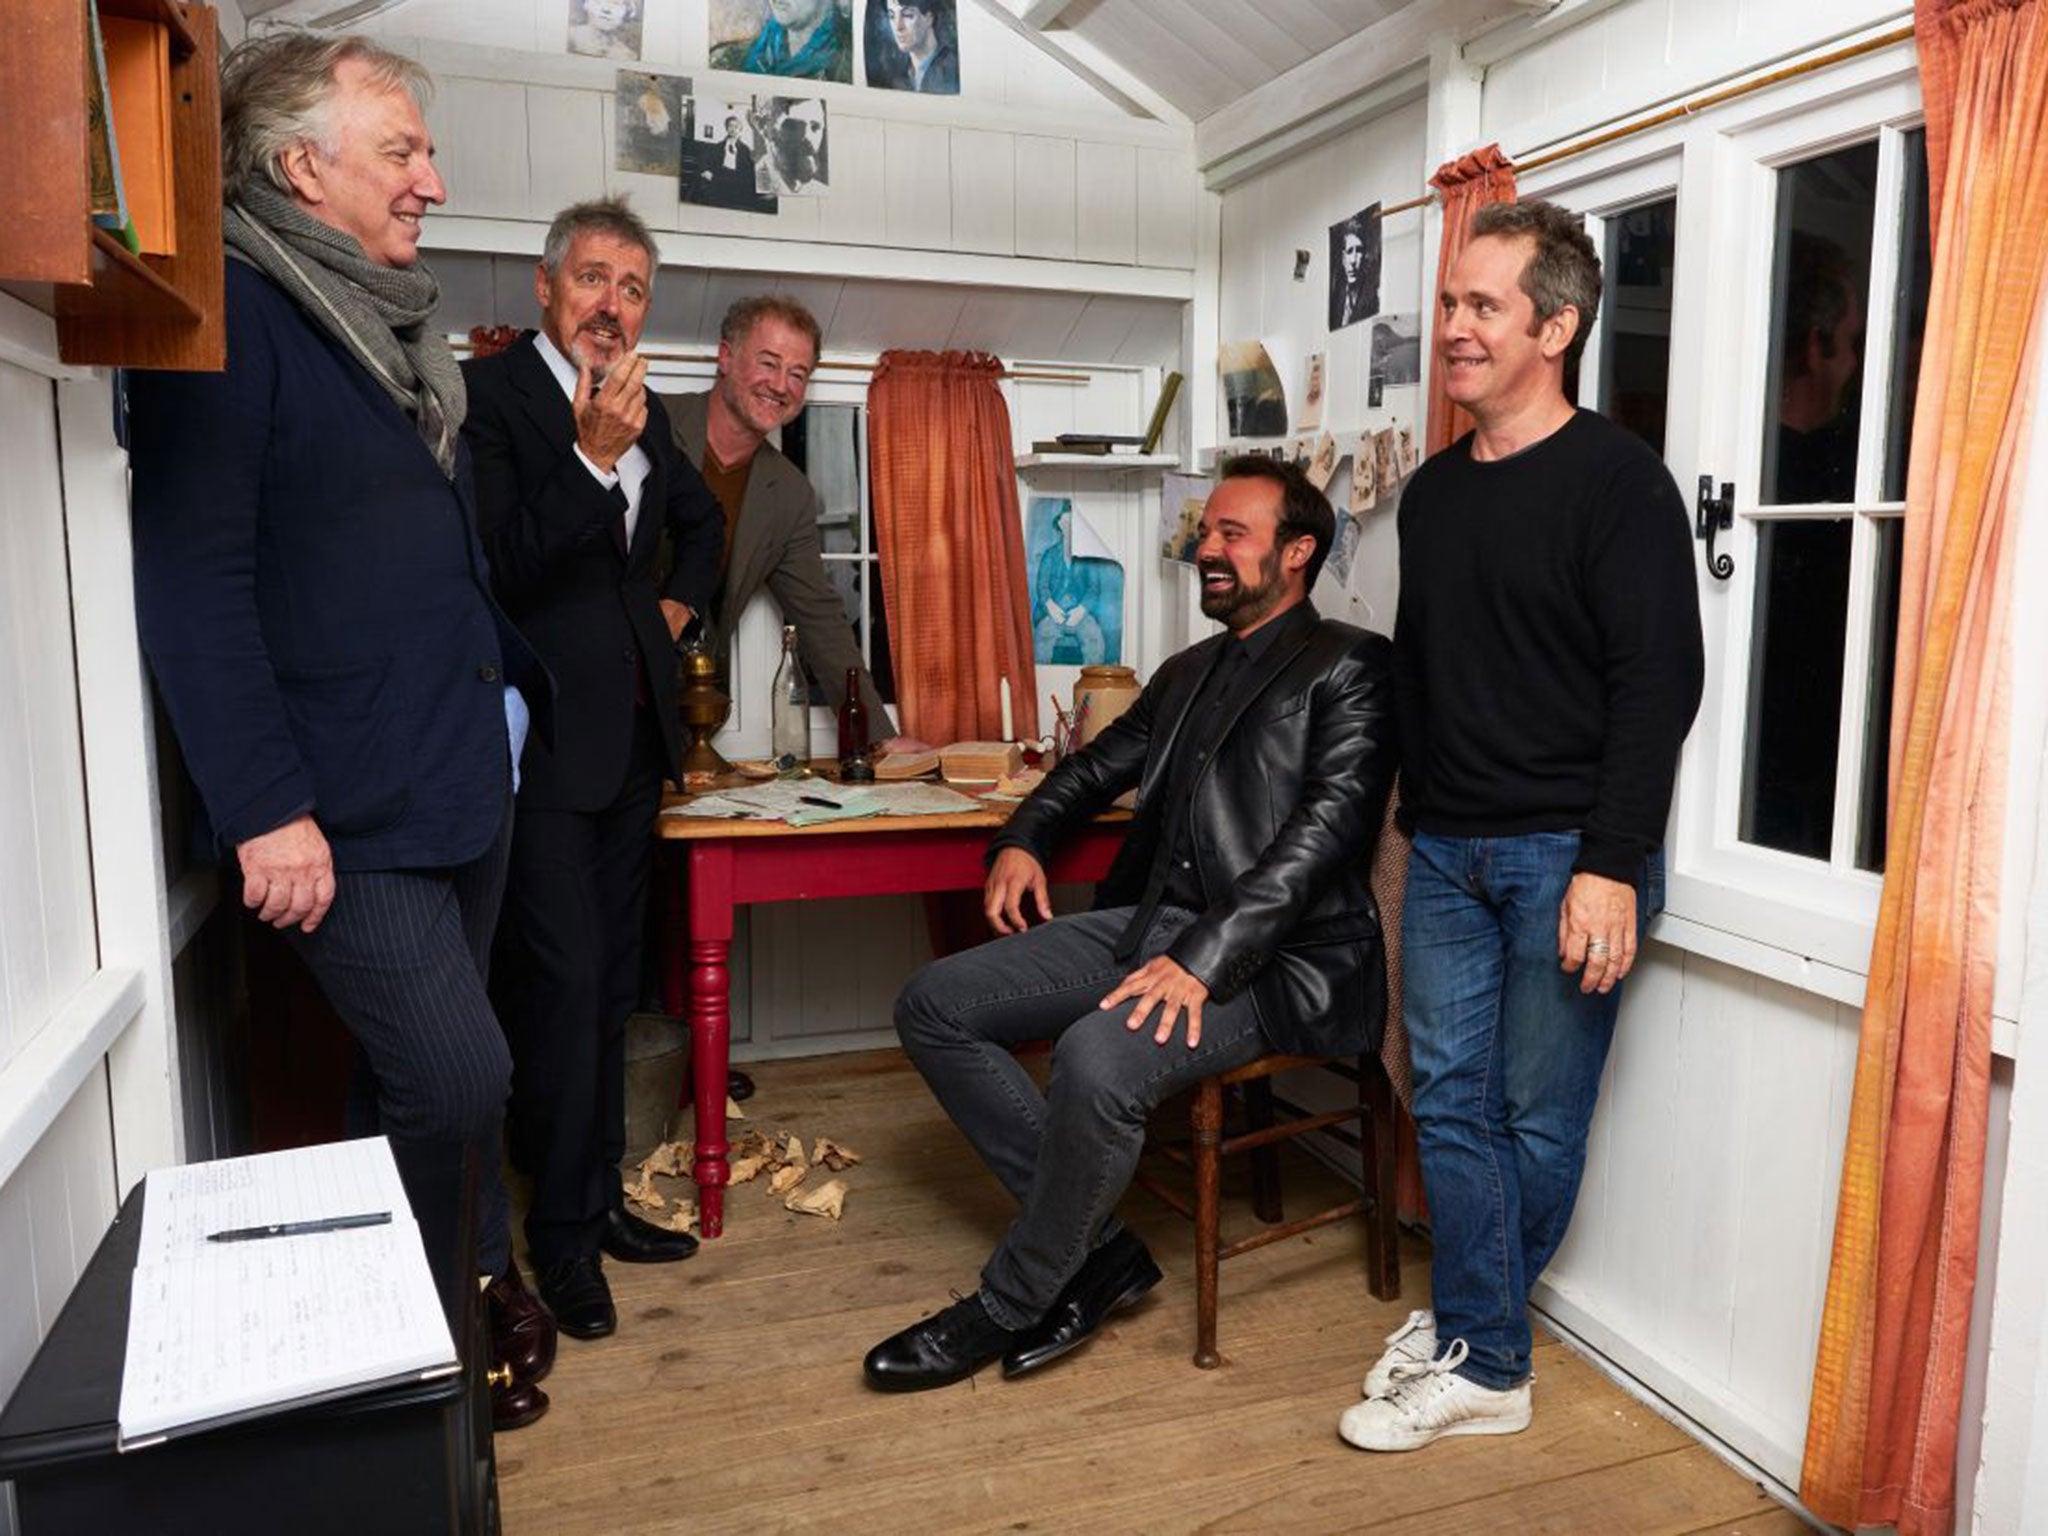 From left: Alan Rickman, Griff Rhys Jones, Owen Teale, Evgeny Lebedev and Tom Hollander in a replica of Dylan Thomas’s shed on Monday